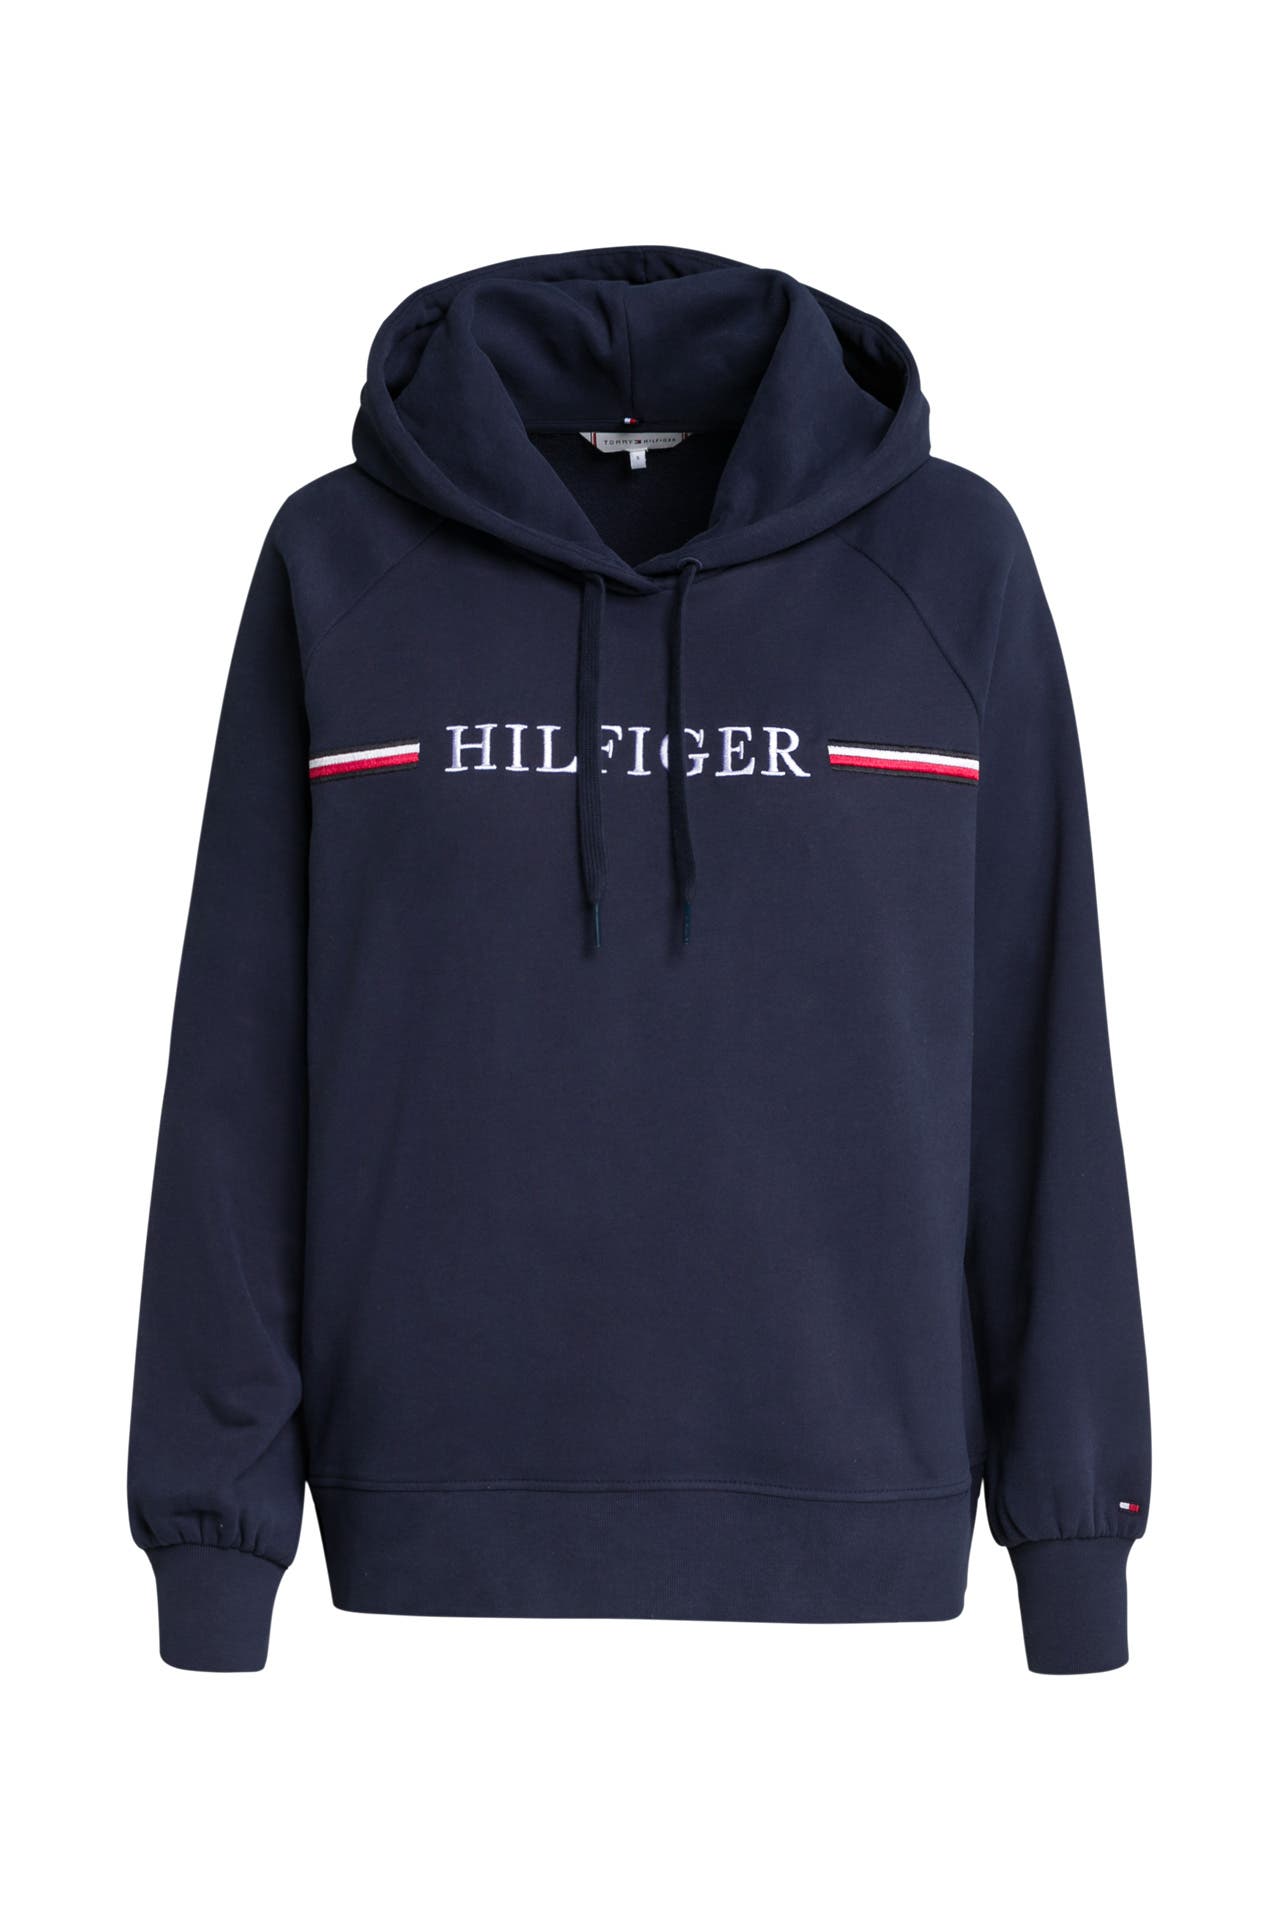 Mexico Whitney Gespecificeerd Tommy Hilfiger OUTLET in Germany » Sale up to 70% off | OUTLETCITY METZINGEN